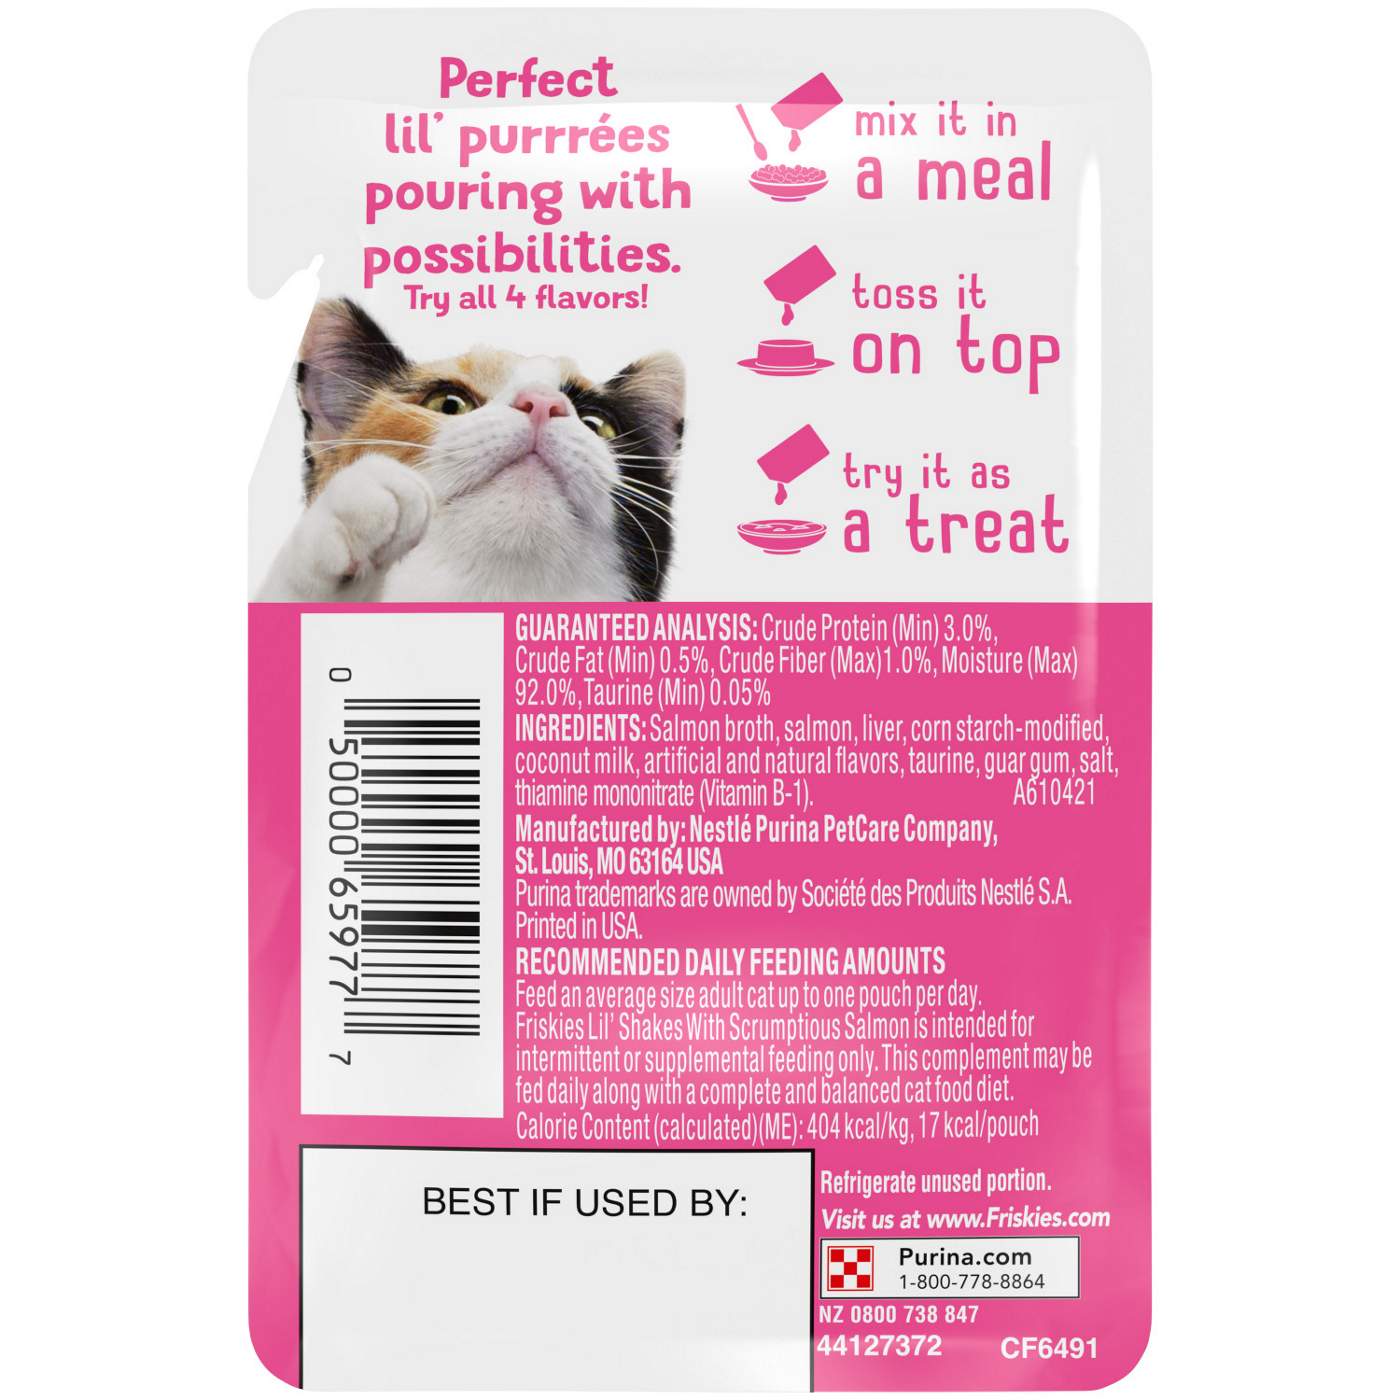 Friskies Purina Friskies Pureed Cat Food Topper, Lil’ Shakes With Scrumptious Salmon Lickable Cat Treats; image 7 of 8